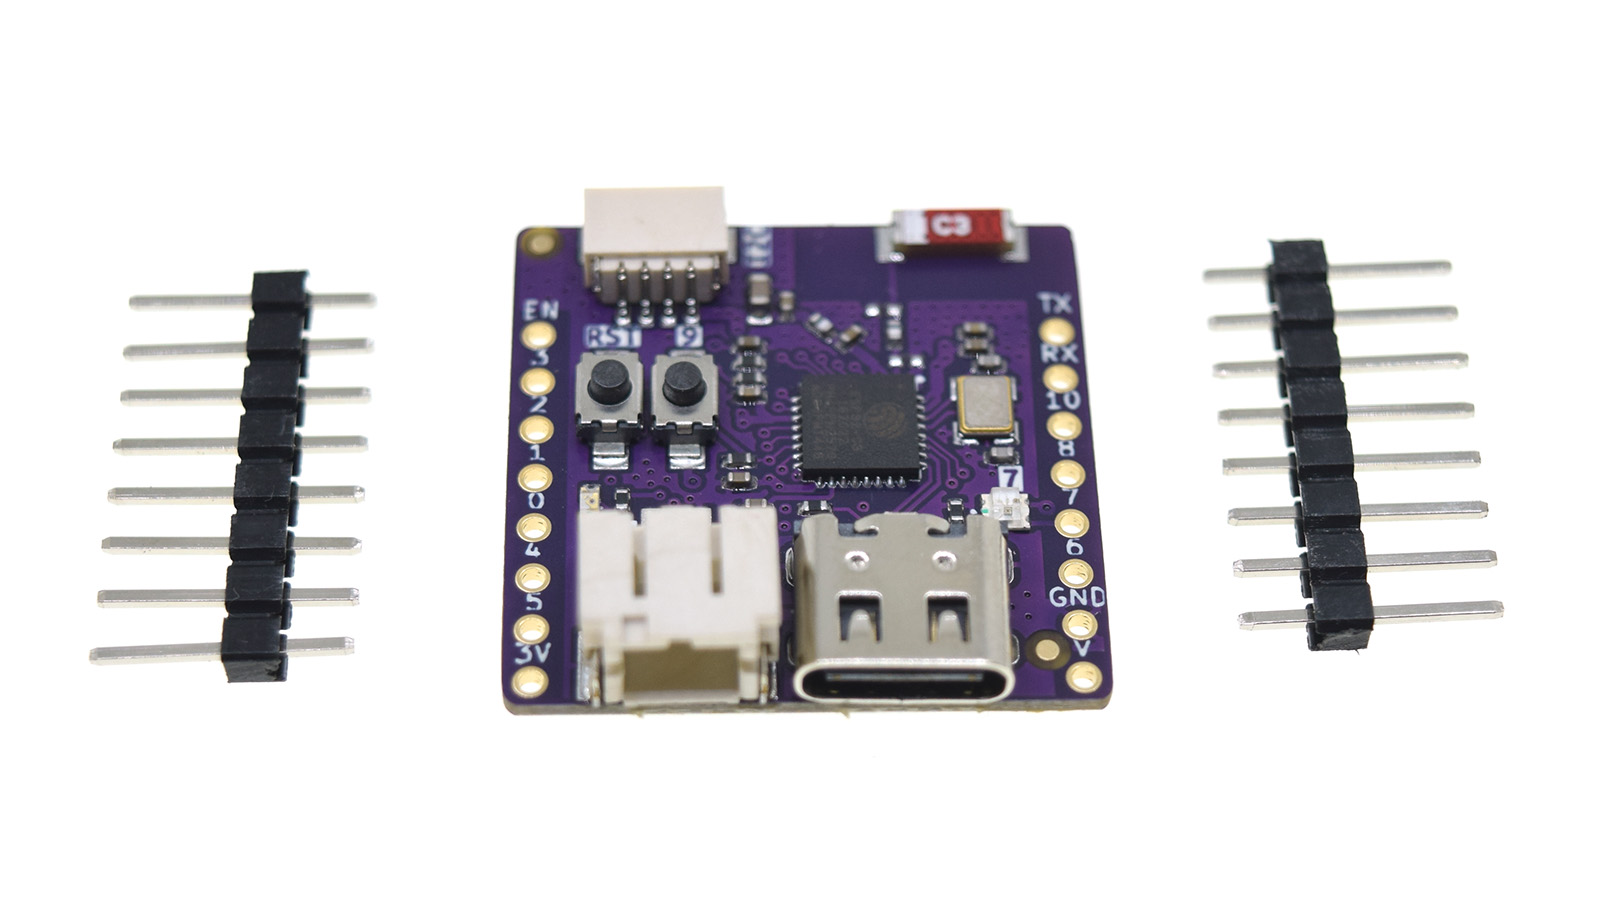 Wemos launched its latest creation: the Wemos Lolin C3 Pico ESP32-C3 board